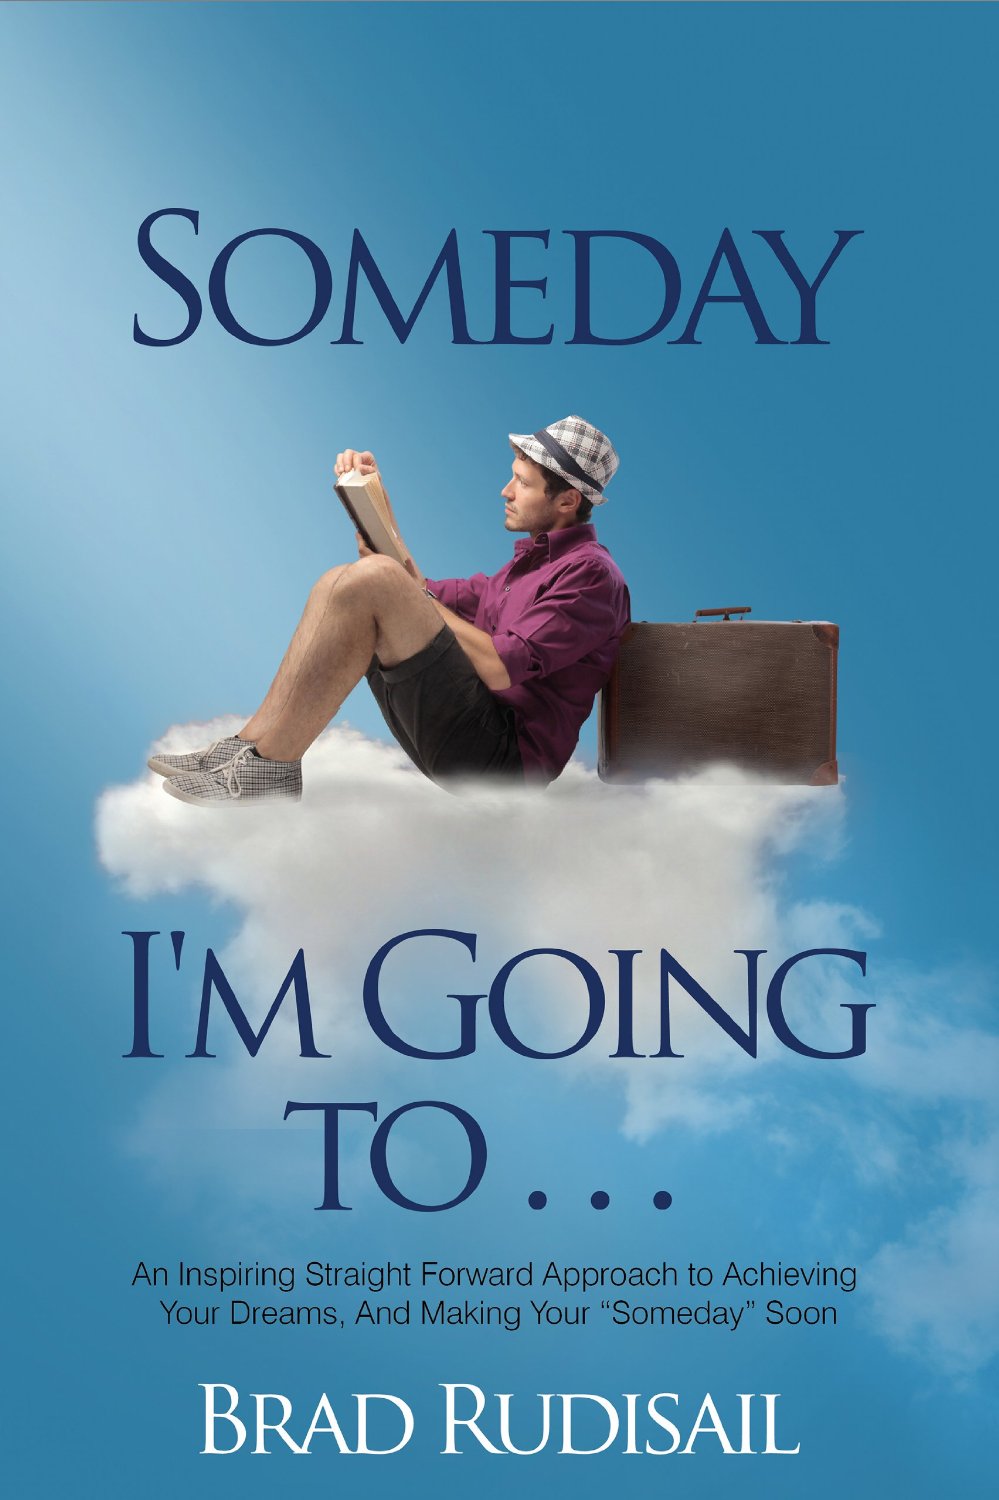 Someday I’m Going To. . . by Brad Rudisail